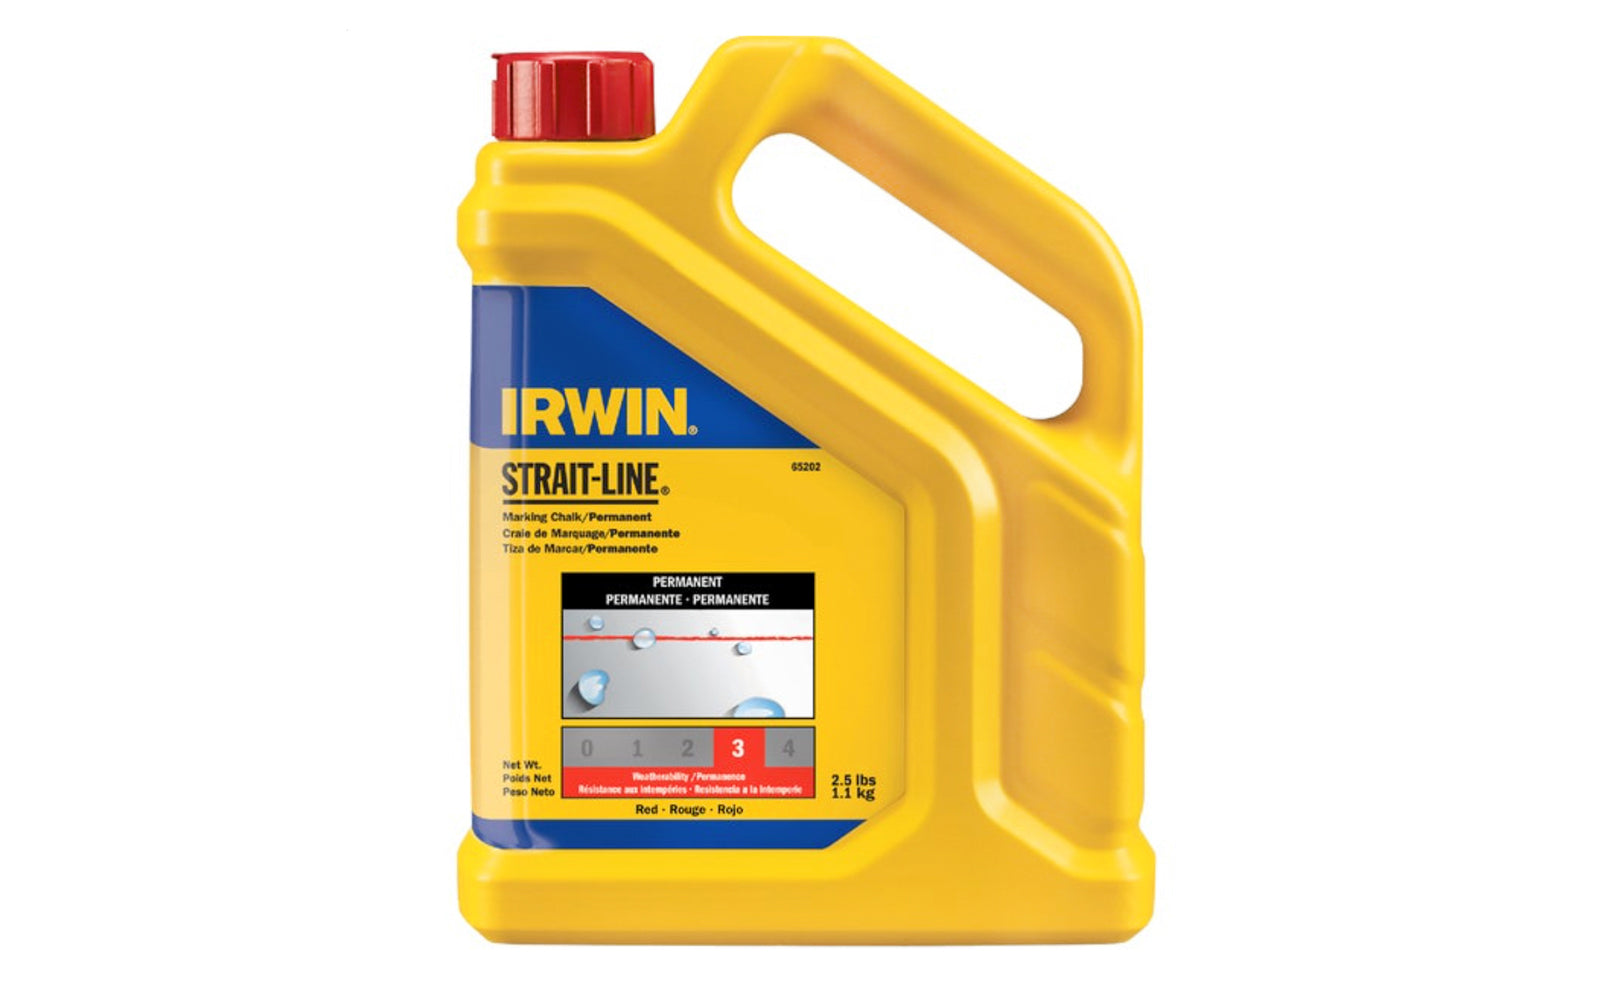 Irwin Strait-Line 2.5 lbs Permanent Red Marking Chalk is designed for reel type chalk line boxes. Fast fill spout. Permanent, Visible after weeks of weather exposure & jobsite wear. For exterior use on surfaces including wood, drywall, concrete, stone, & metal. Red color chalk. 2-1/2 lbs container. Model 65202.